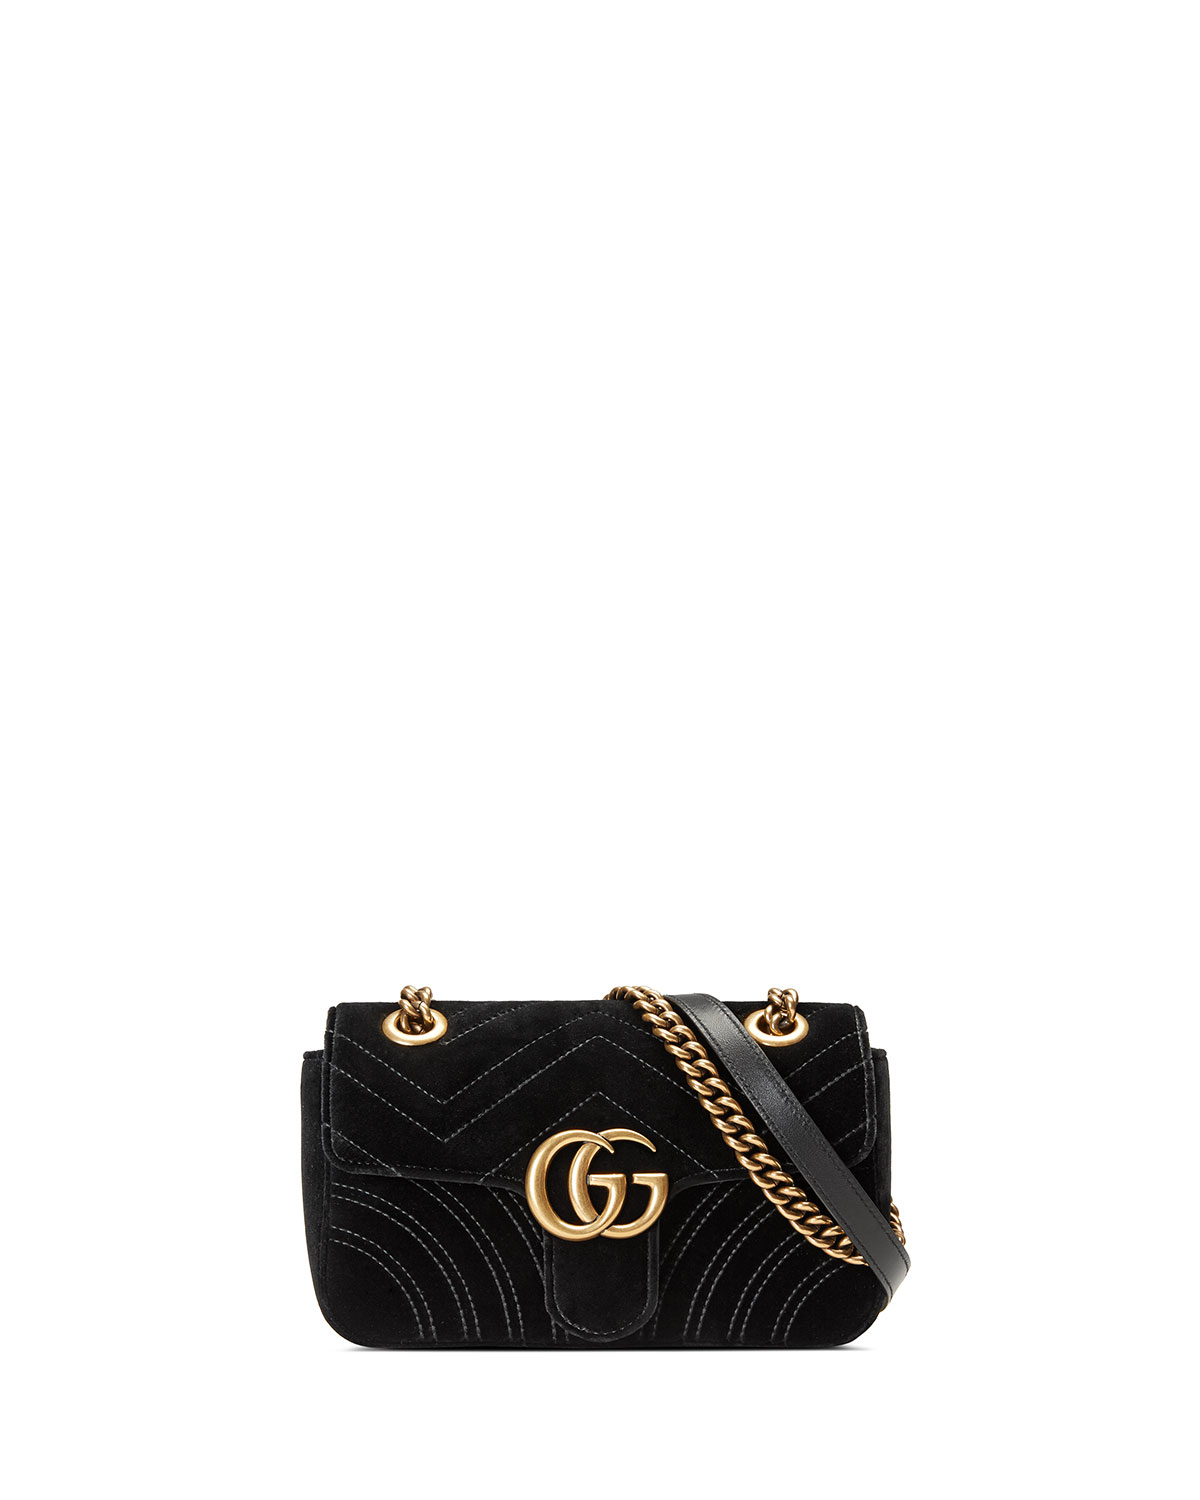 Gucci Gg Marmont 2.0 Mini Quilted Velvet Crossbody Bag in Black - Lyst